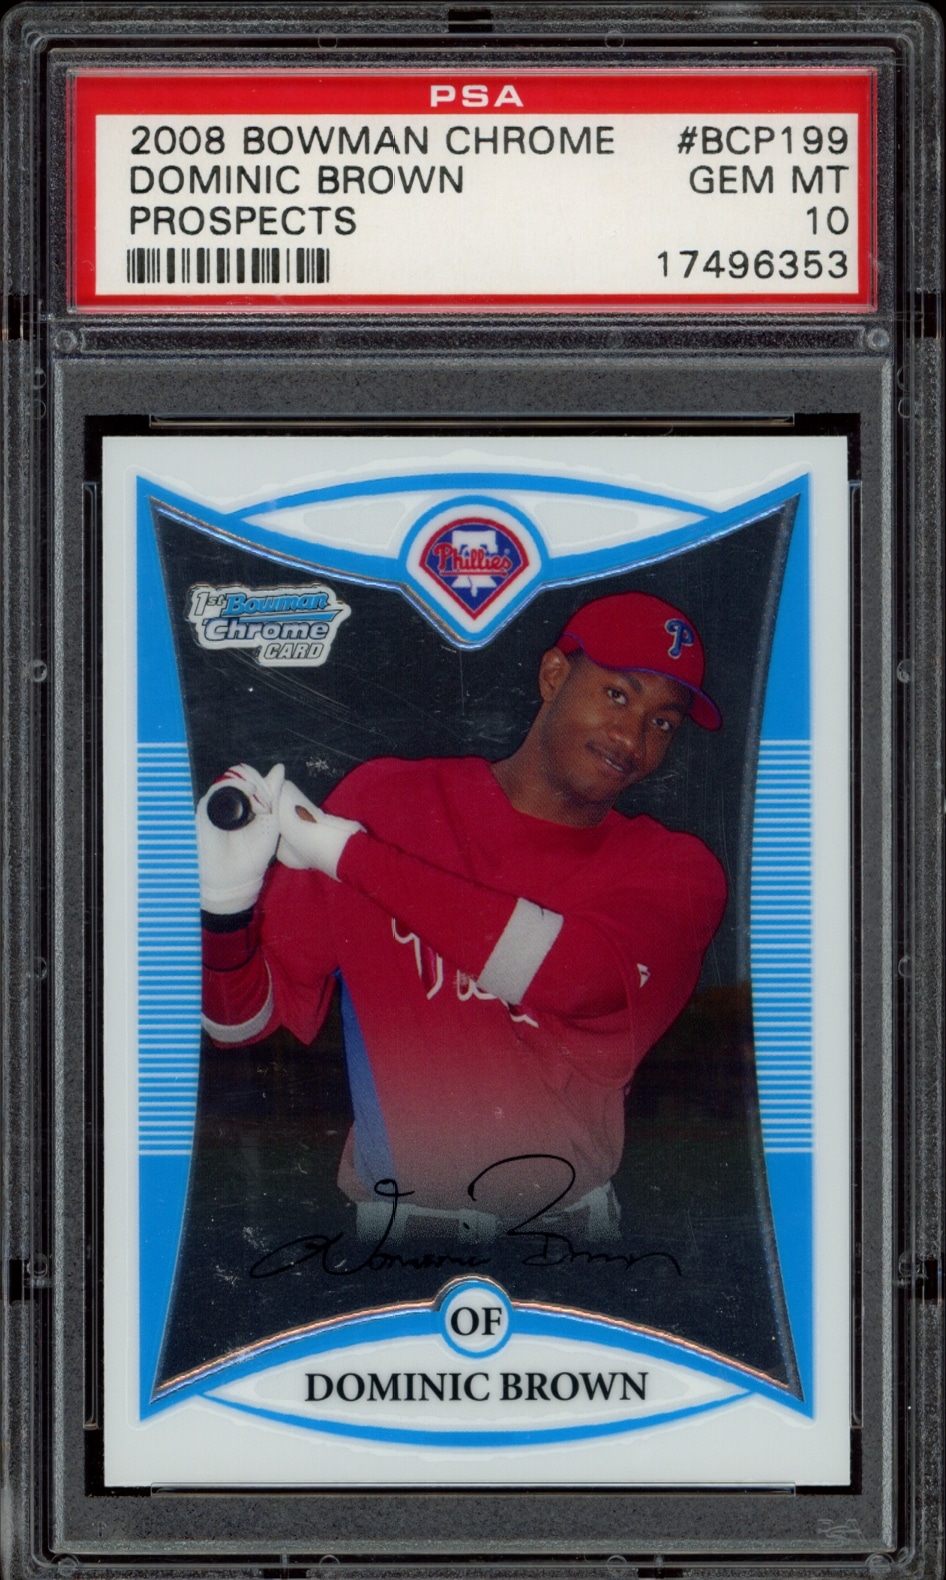 Dominic Browns 2008 Bowman Chrome Prospects card #BCP199 in PSA 10 gem mint condition.